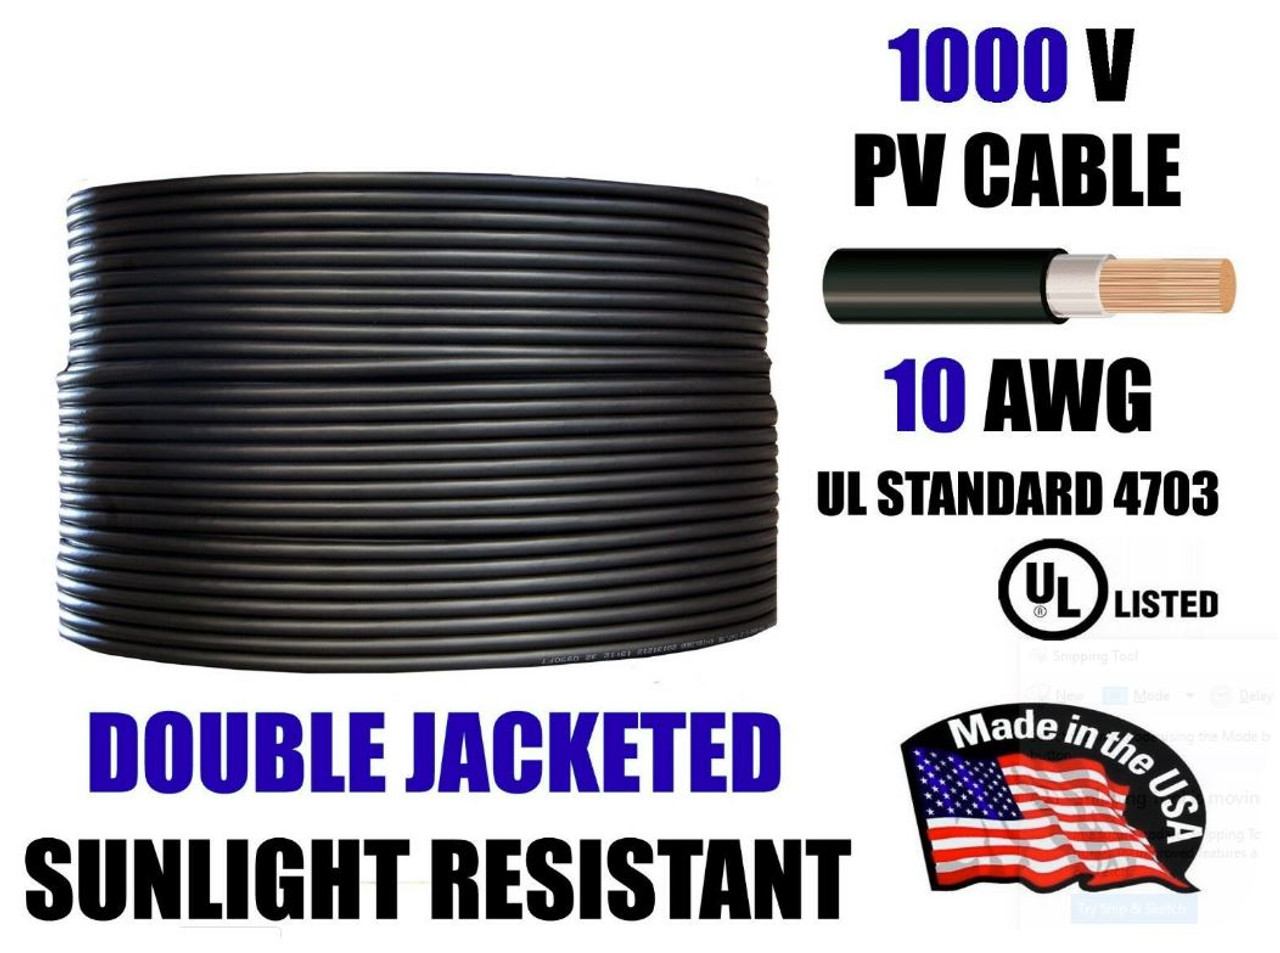 dulce recibo élite 10 AWG Gauge PV Wire 1000V Pre-Cut for Solar Installation Double Jacketed  Copper, Sunlight Resistant, USA Made